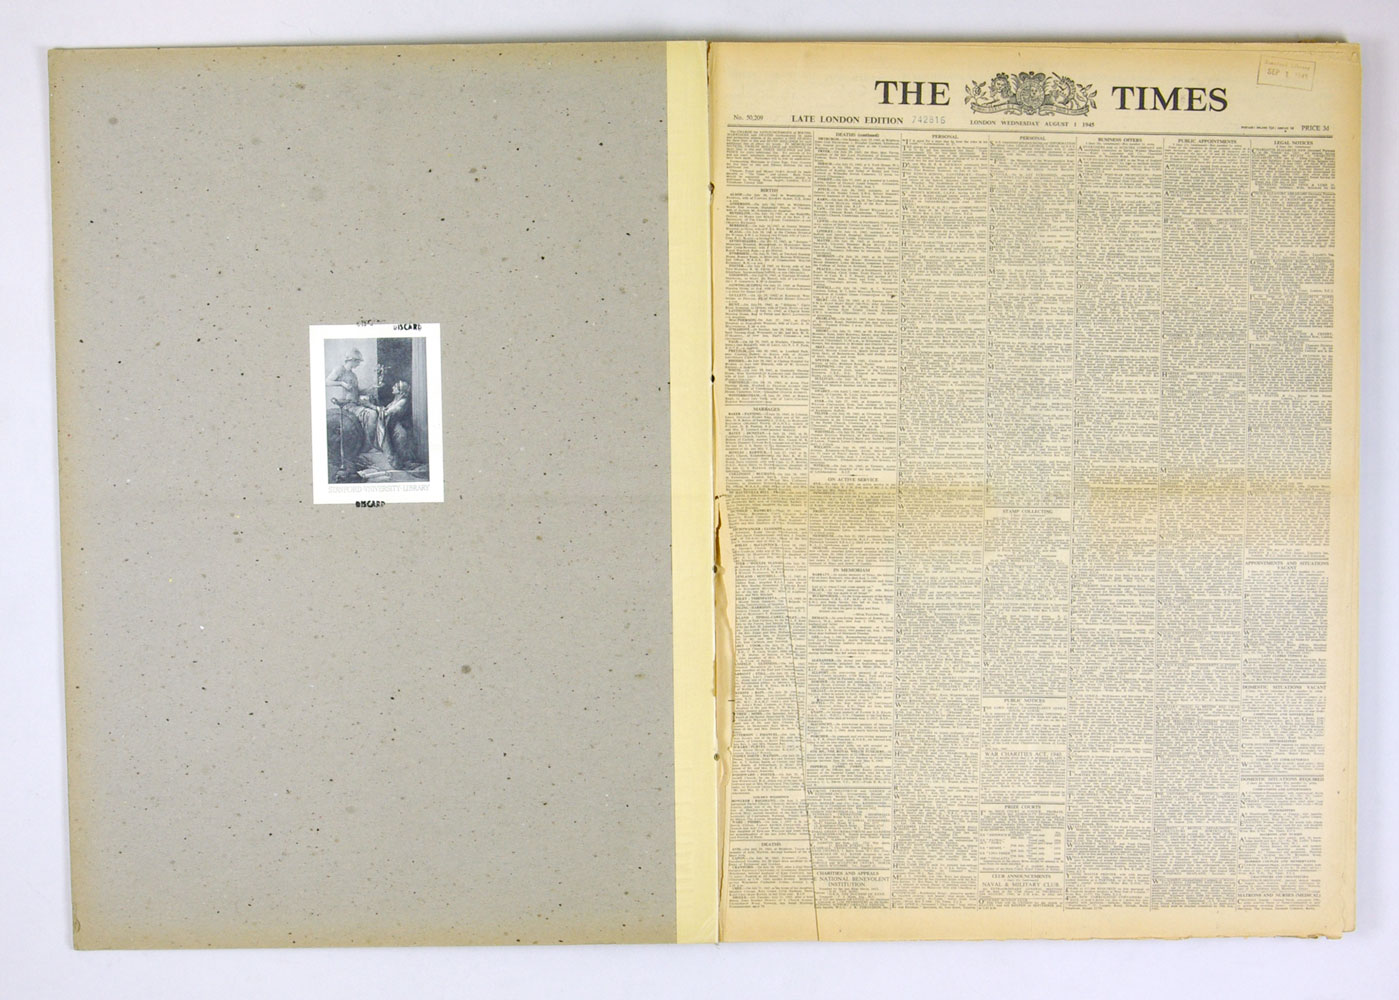 LONDON Times Historical News Paper 1945 April July August The End of WW II Bound Book Set of 3